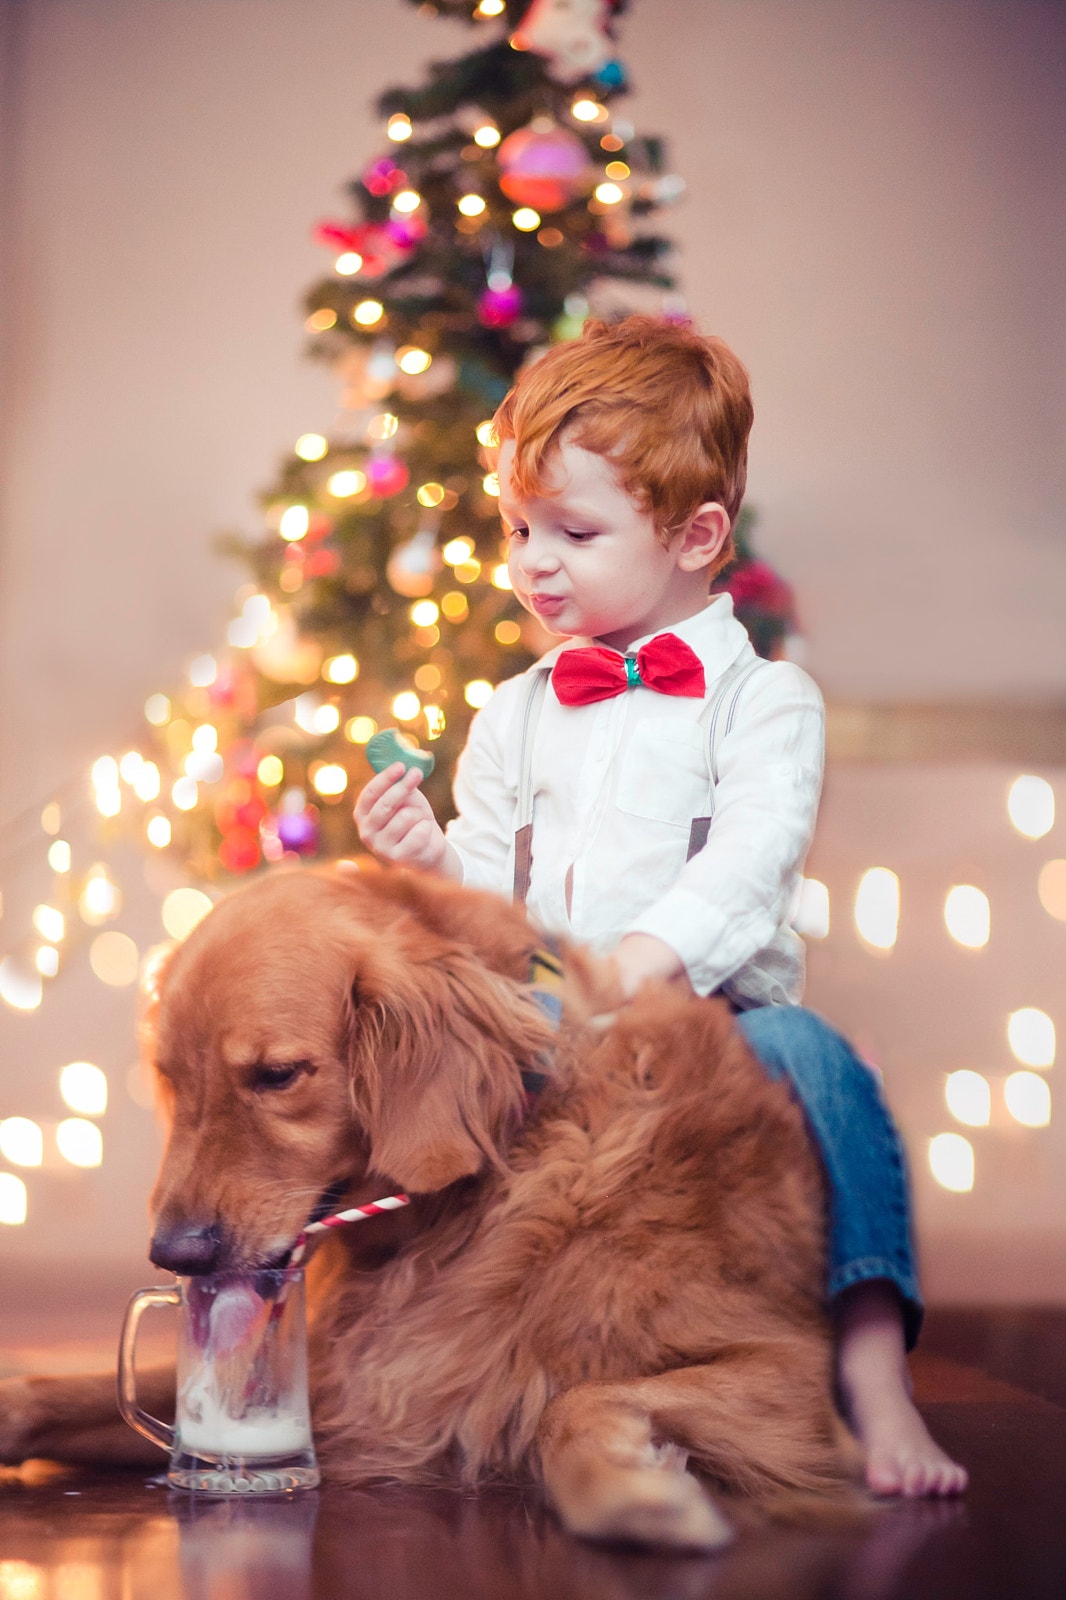 20 Photos That Will Make You Nostalgic for the Holidays Including Some Very Adorable Pets